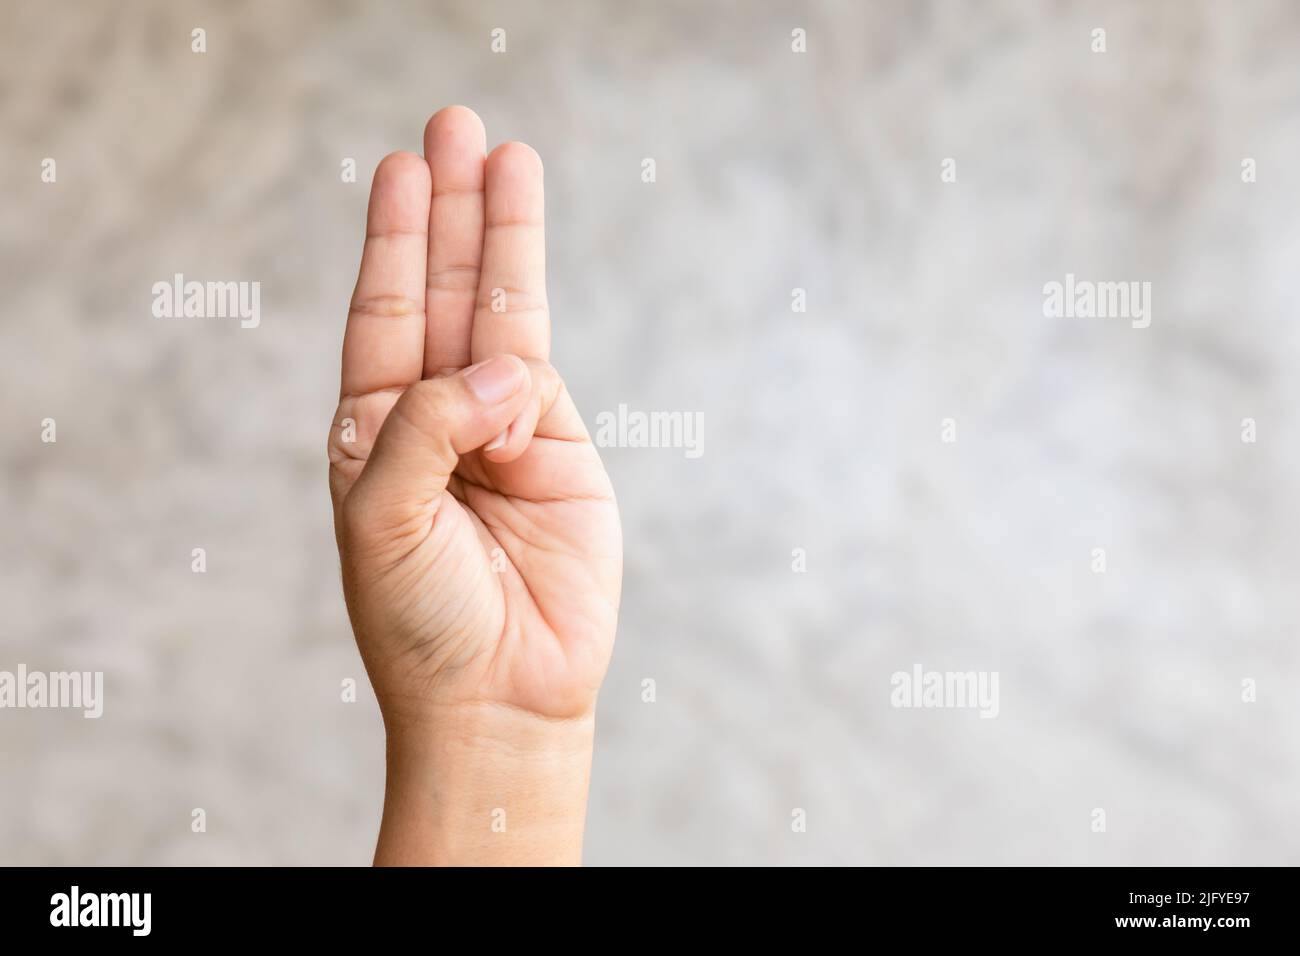 Close up hand showing three finger symbol on grey background with copy space Stock Photo